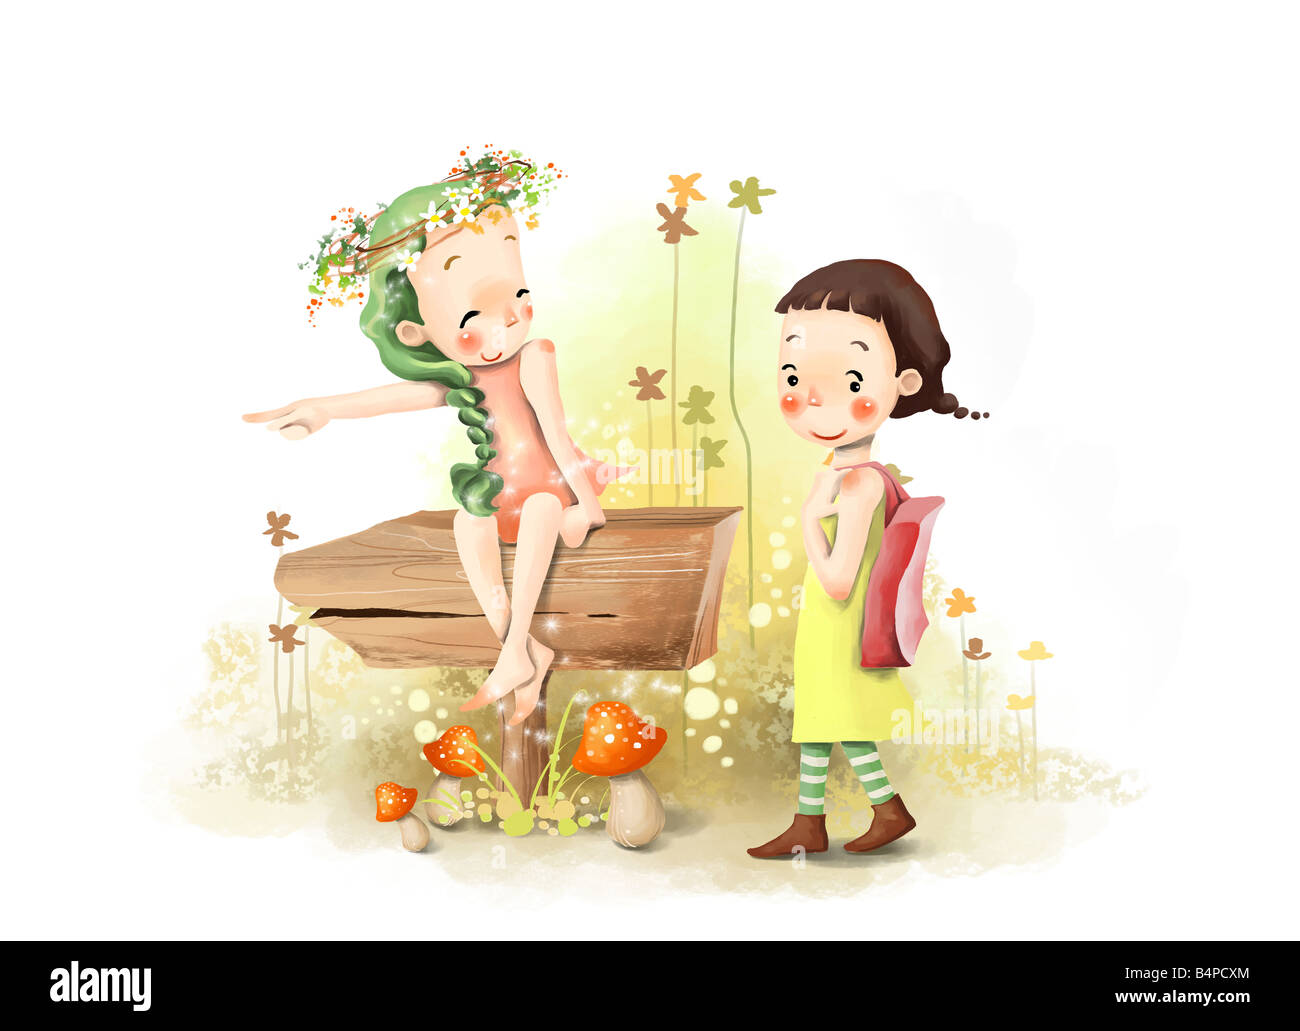 Representation of boy and girl playing in park Stock Photo